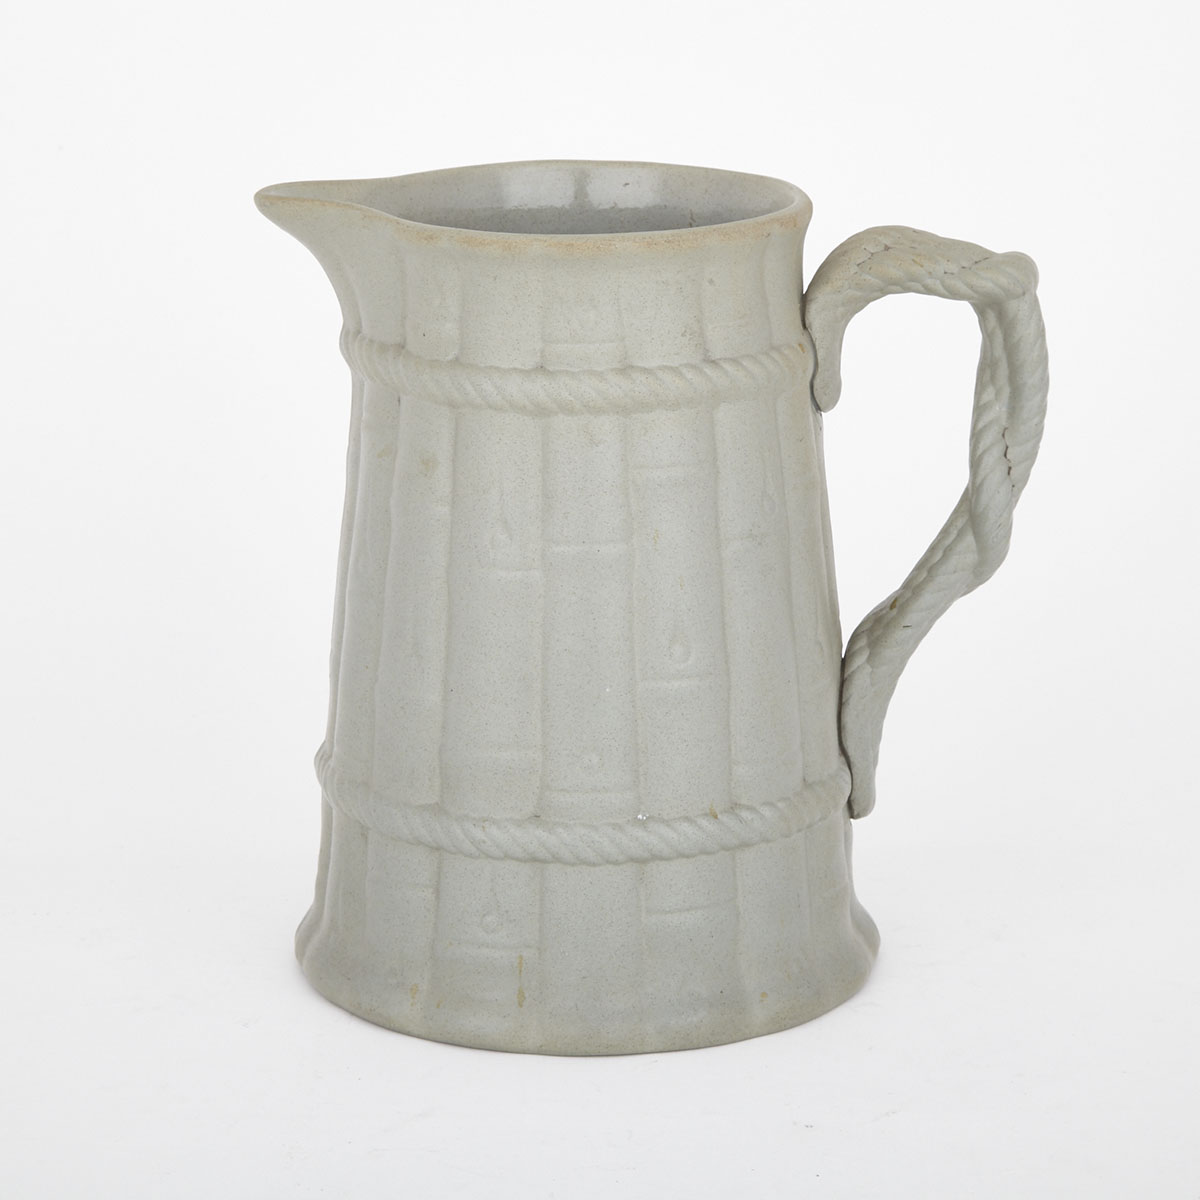 Ridgway Moulded Green Stoneware ‘Bamboo’ Pitcher, c.1835